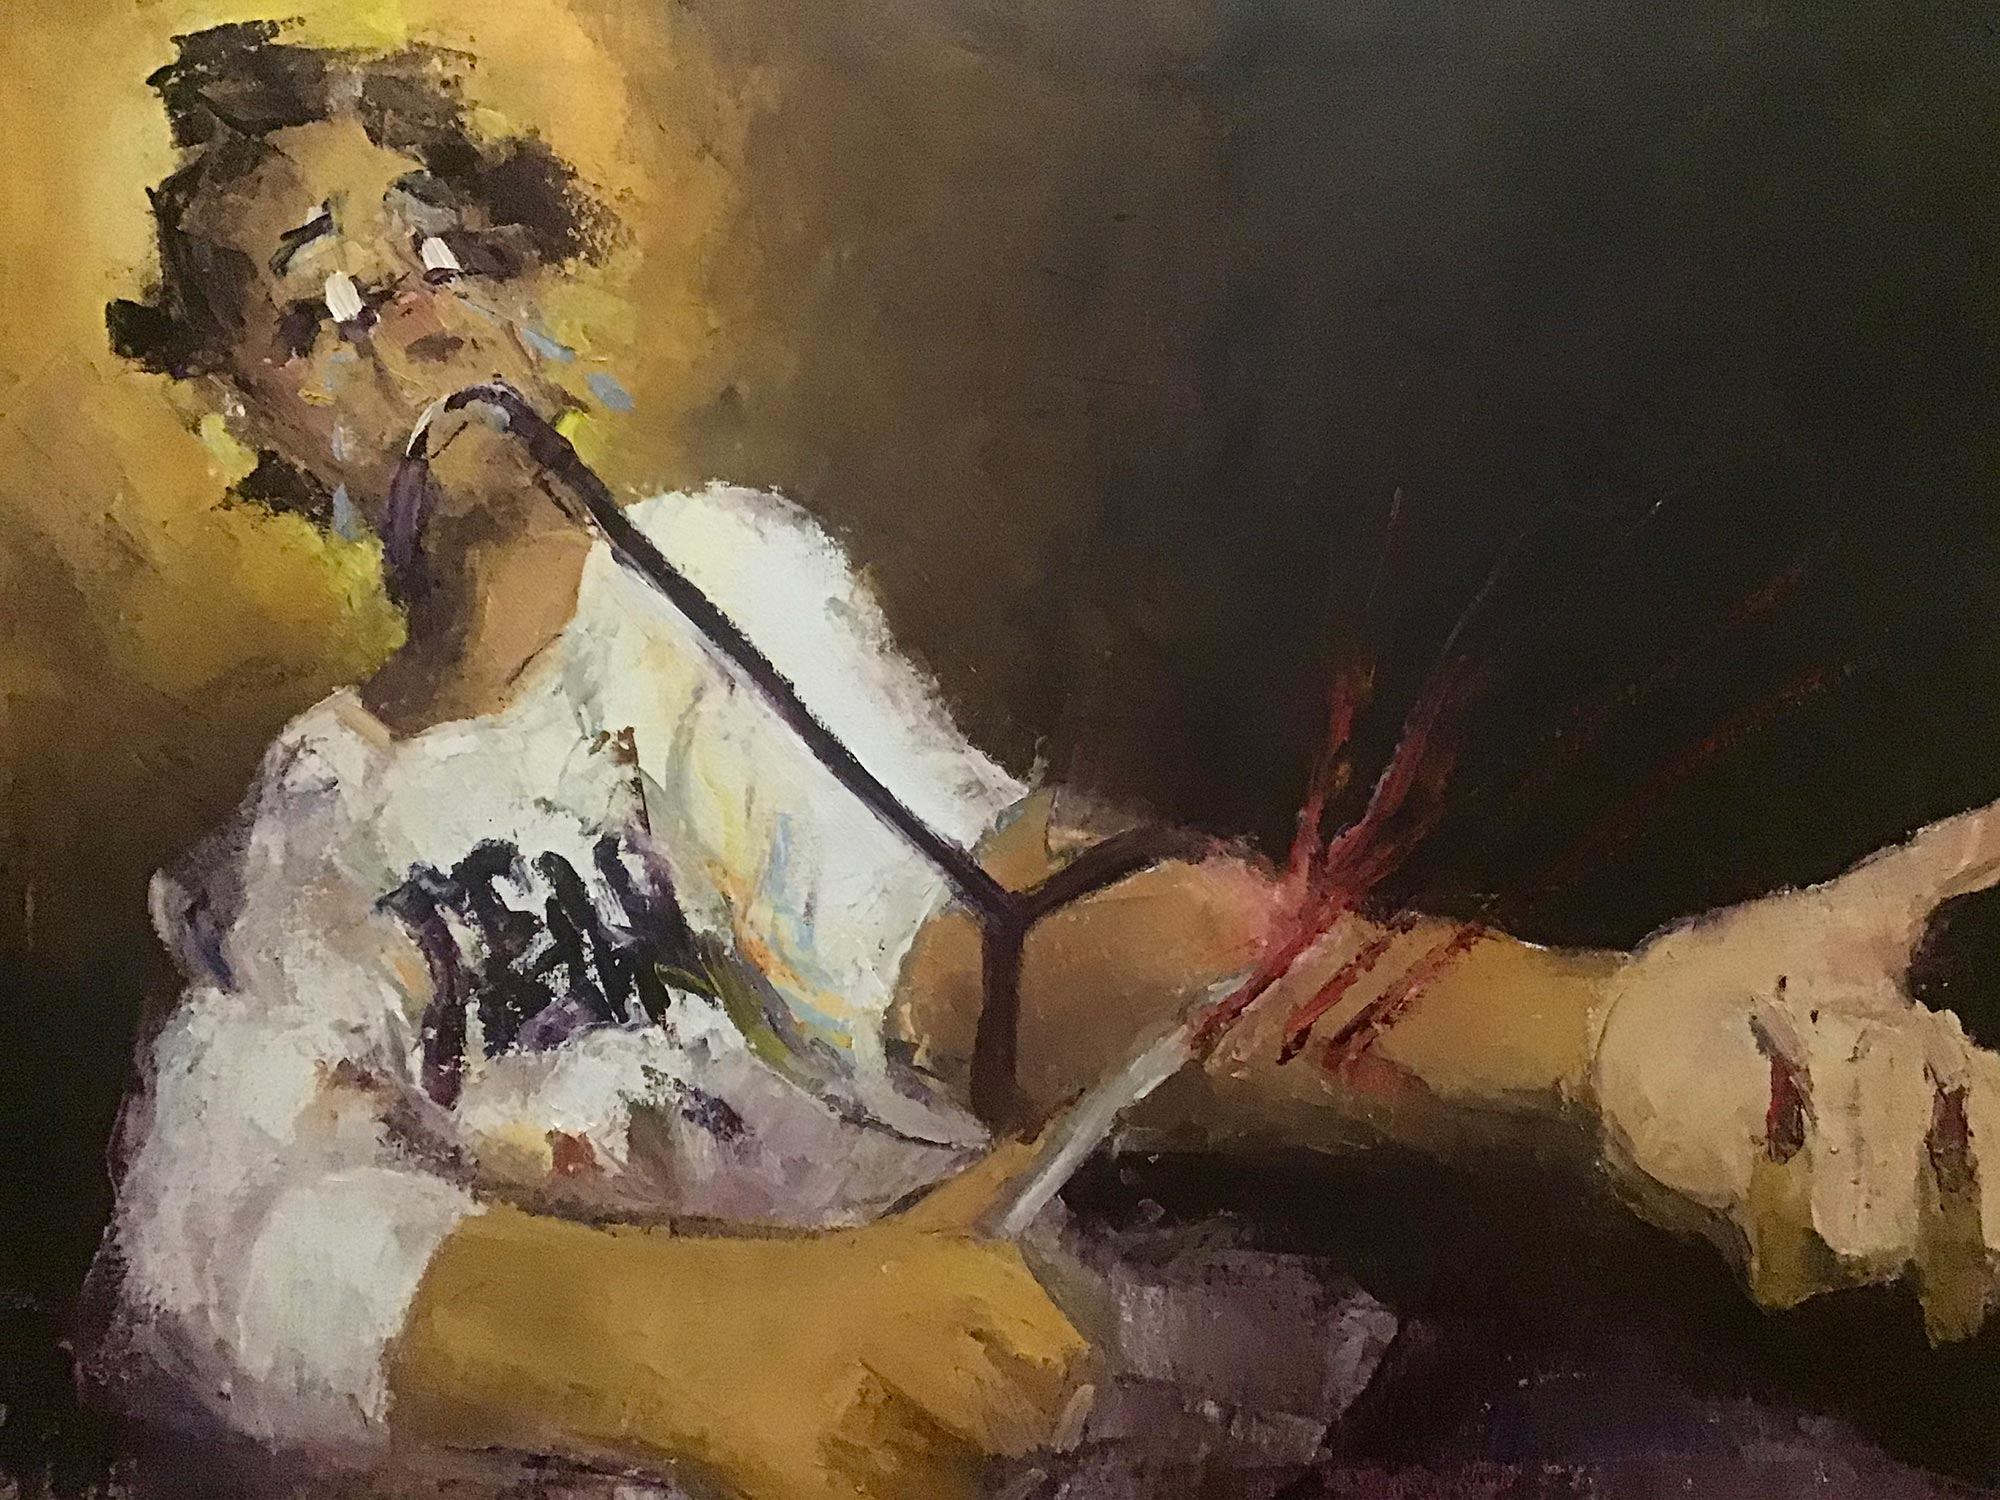 A painting of a person cutting their arm